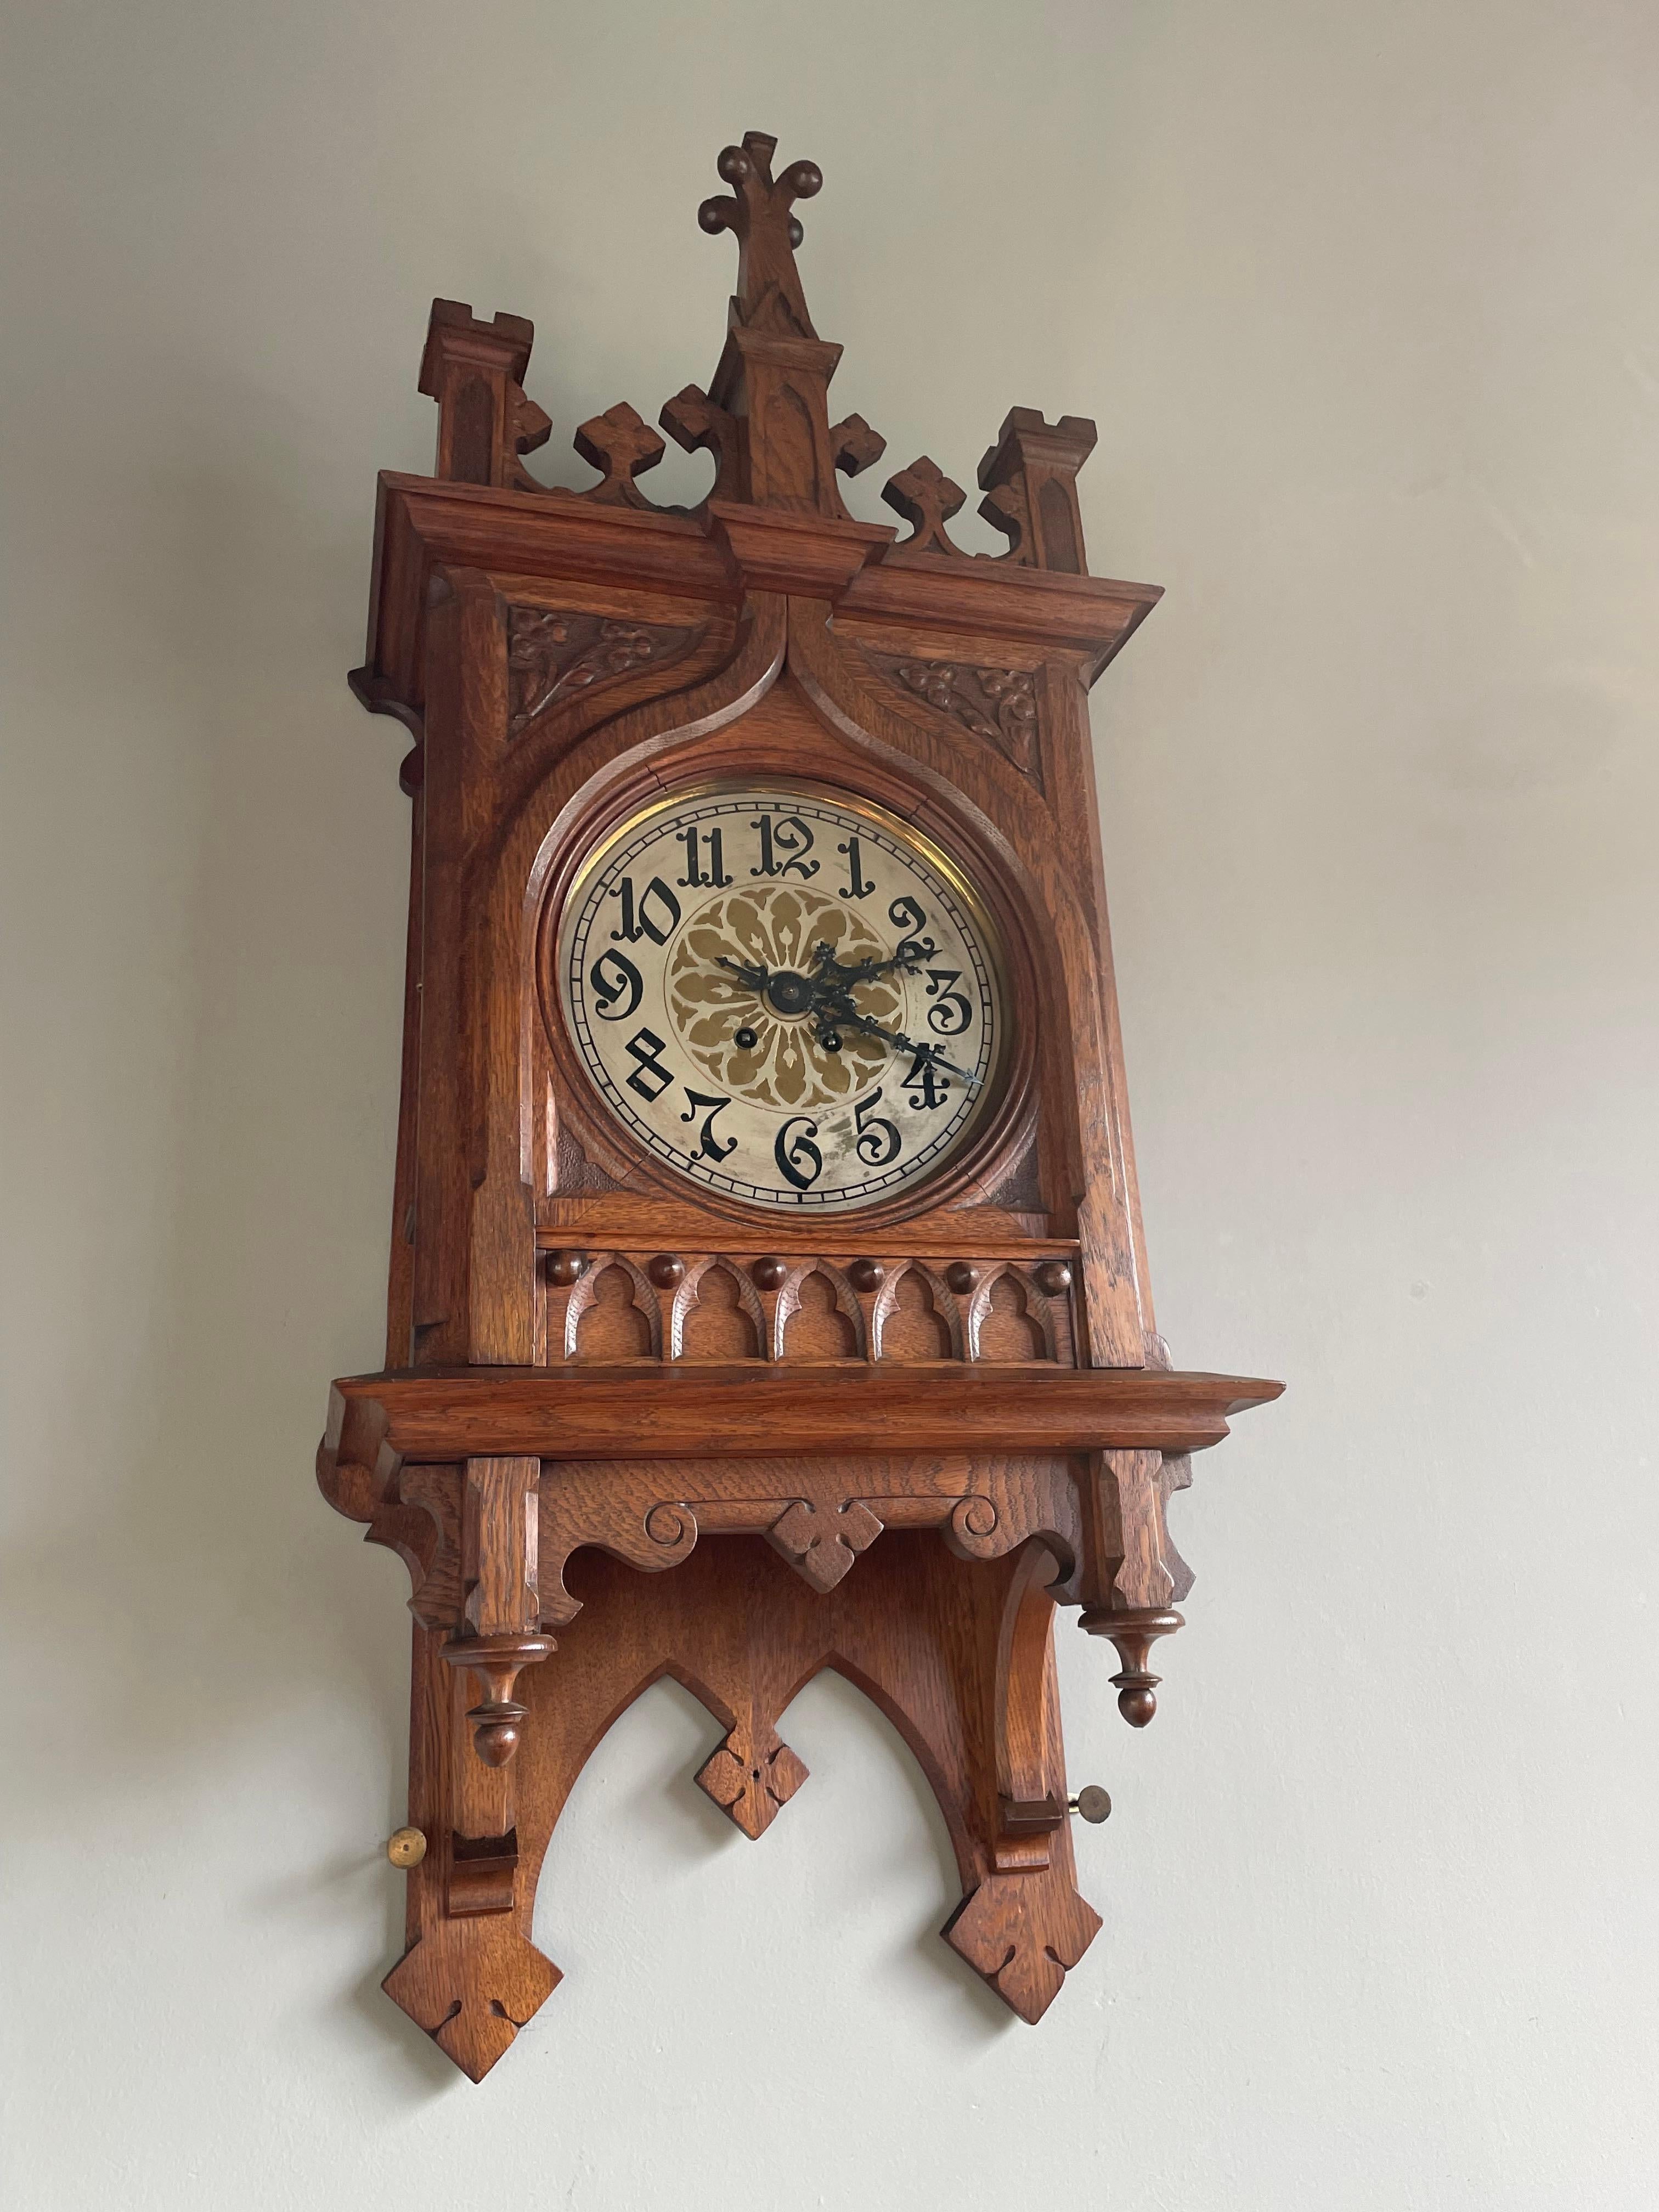 European Rare & Large Antique Hand Carved Gothic Revival Wall Clock w. Lenzkirch Movement For Sale